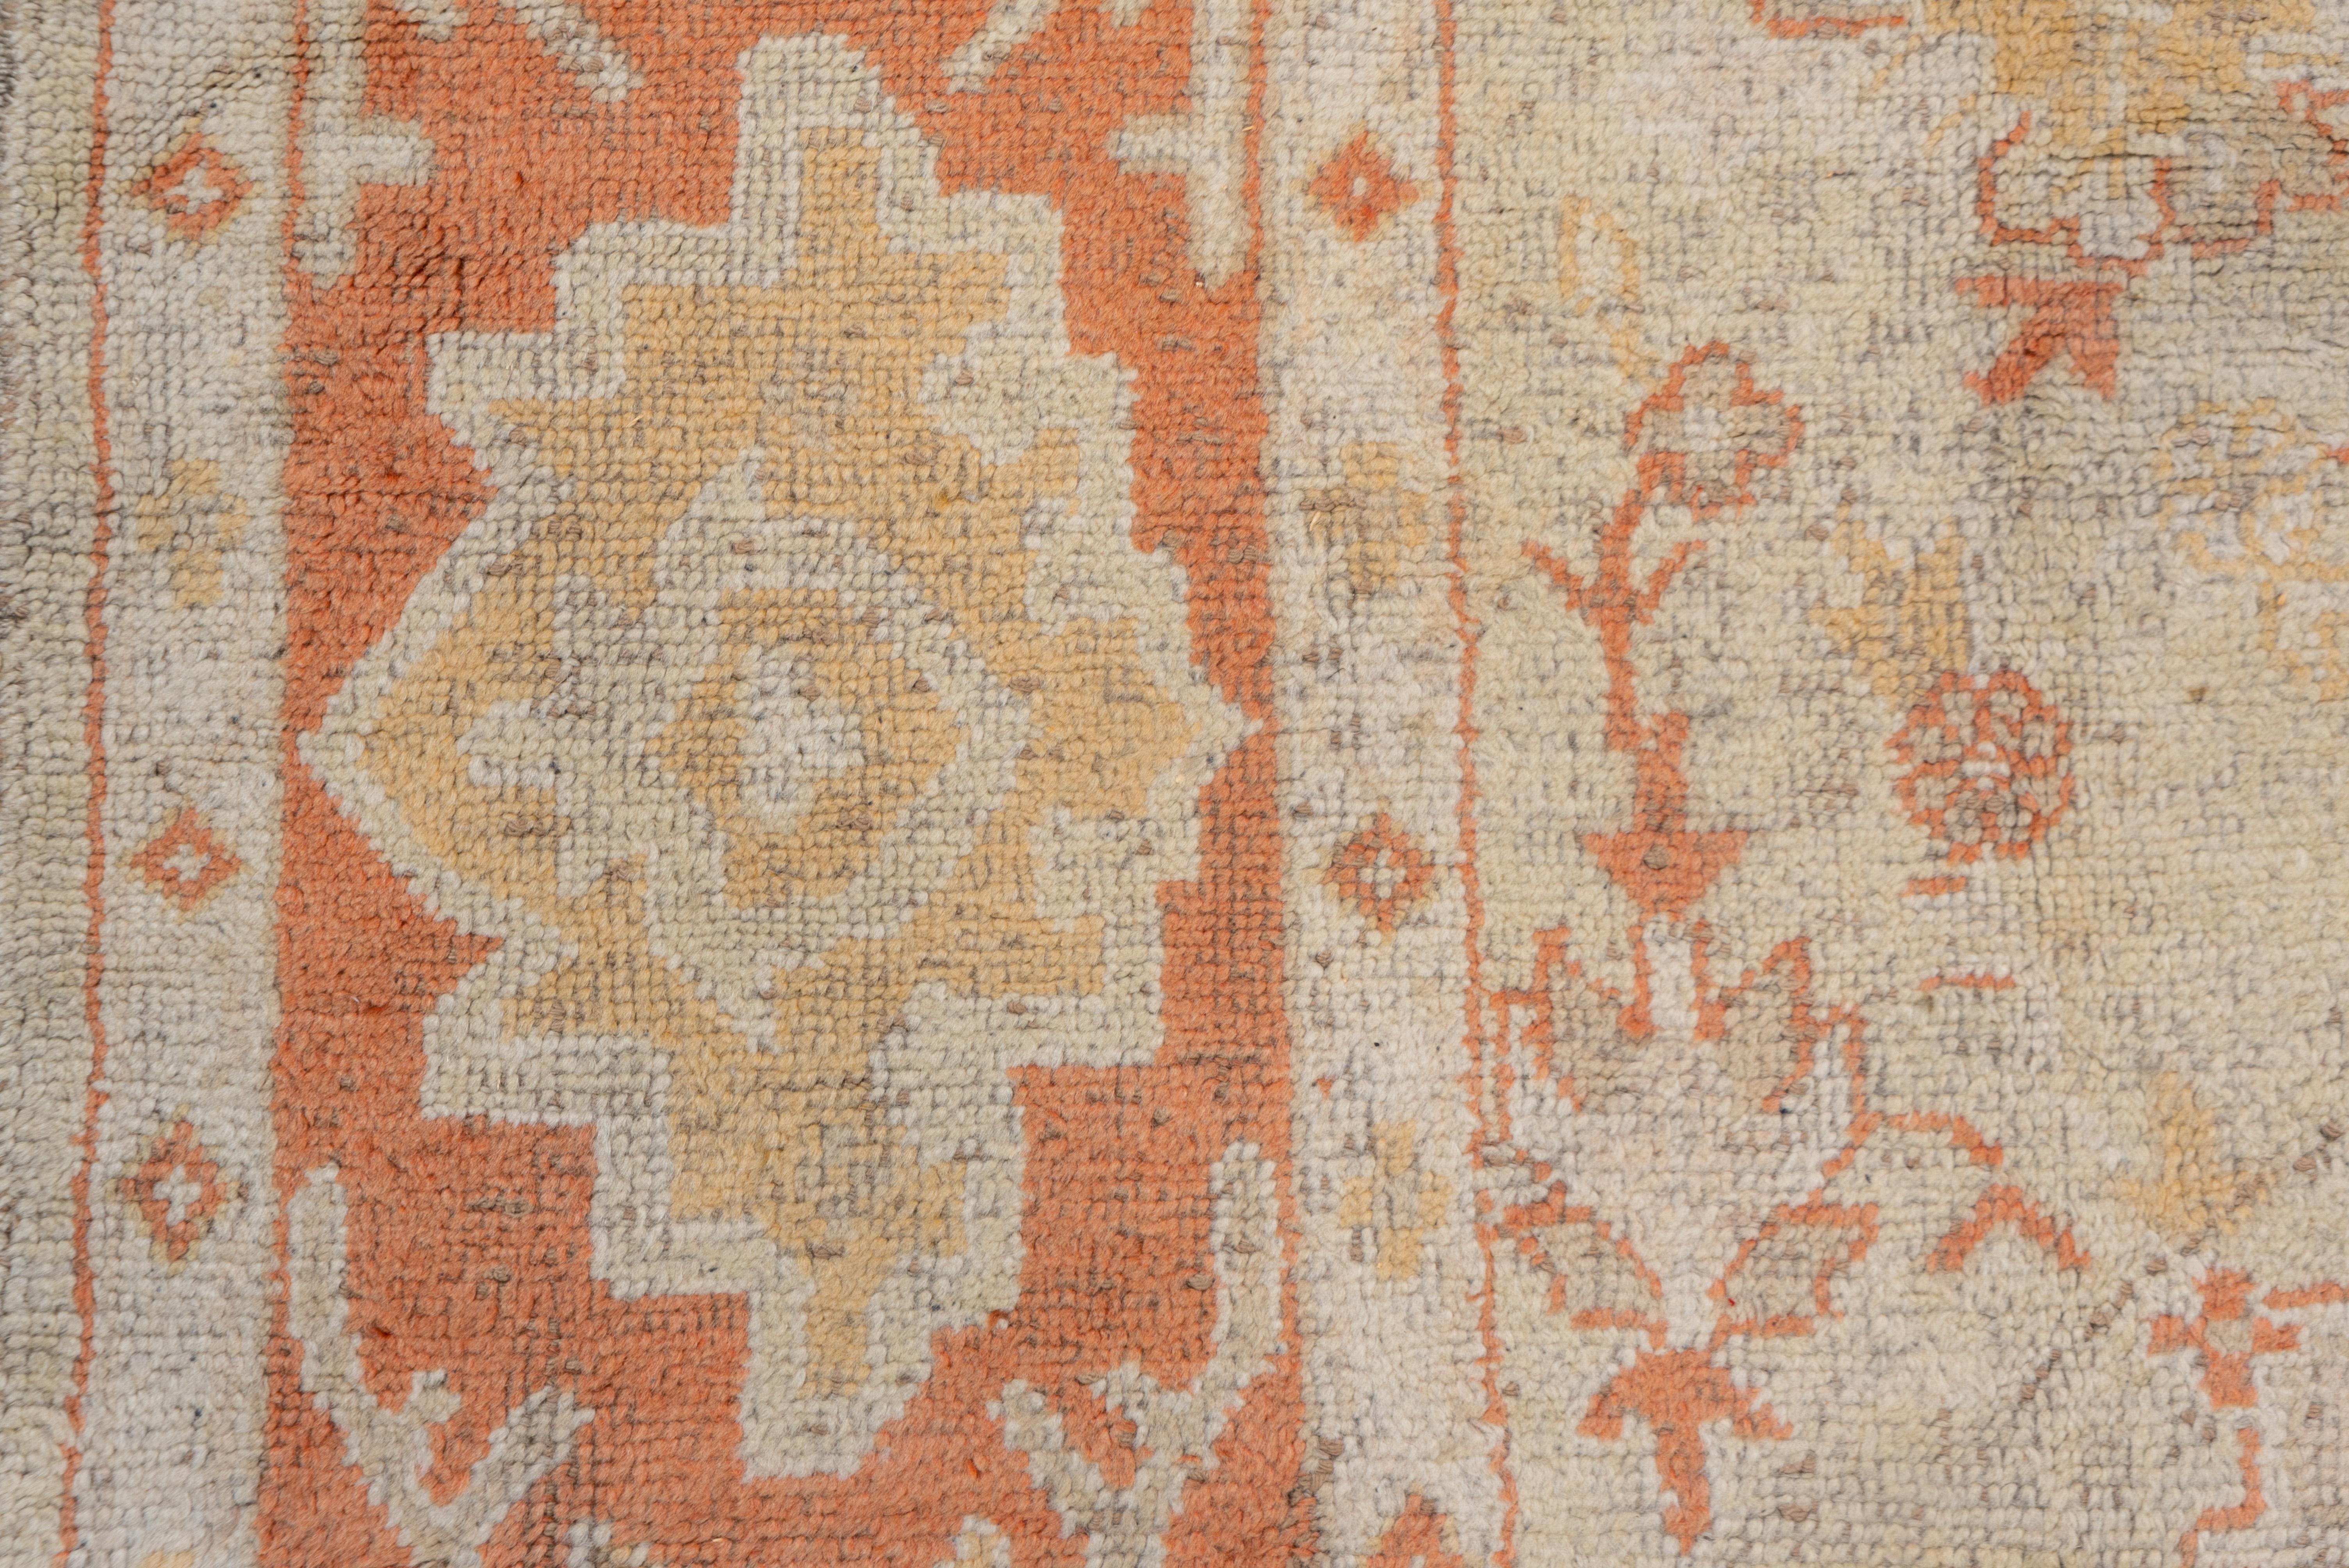 Wool Antique Turkish Oushak Rug, Neutral Field, Orange Borders & Accents, circa 1910s For Sale